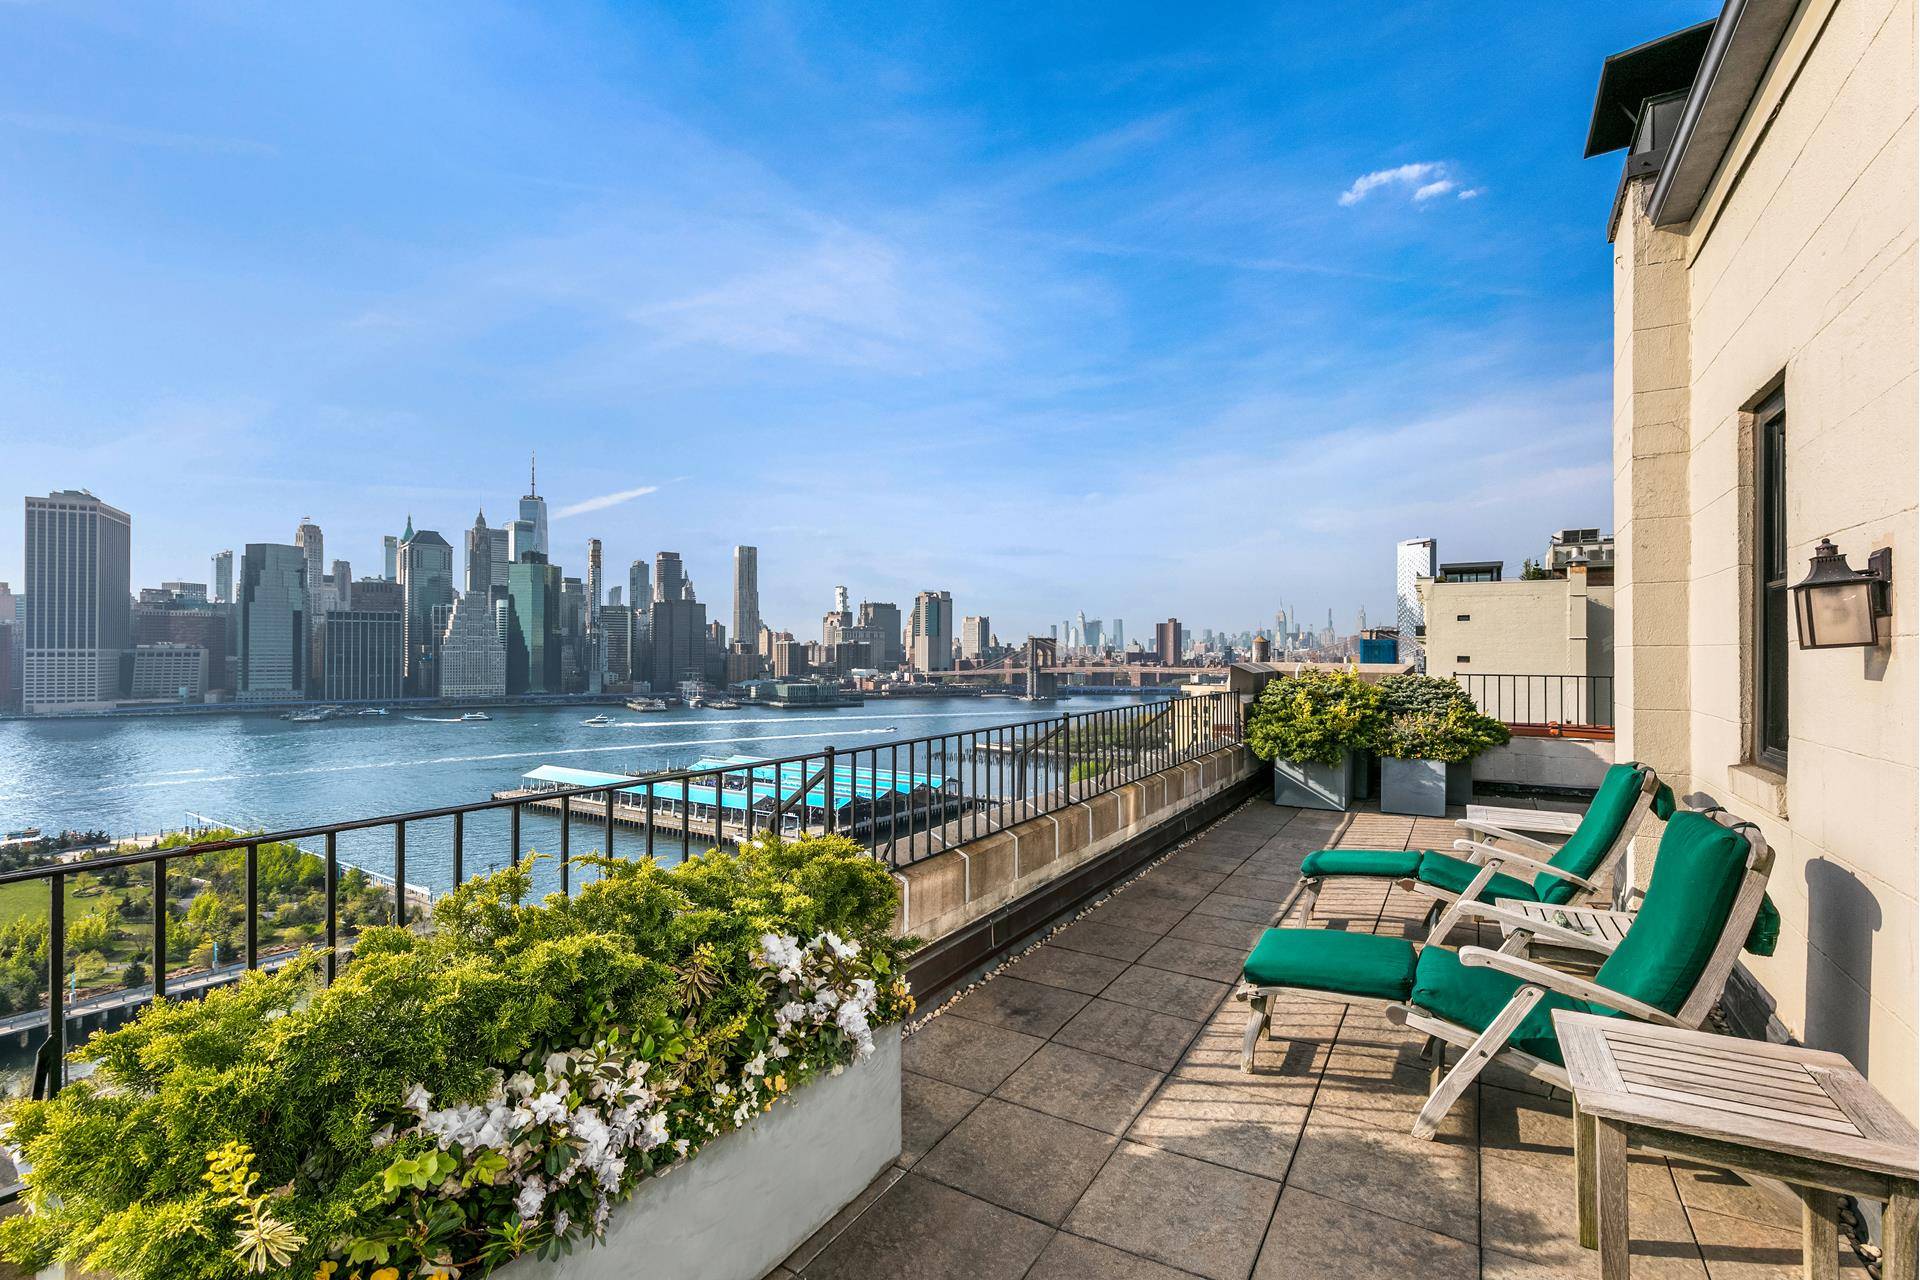 The Most Prime Penthouse in Brooklyn Heights With 93 feet of direct East River and New York Harbor frontage, Penthouse B at One Pierrepont Street offers a spectacular 360 degree ...